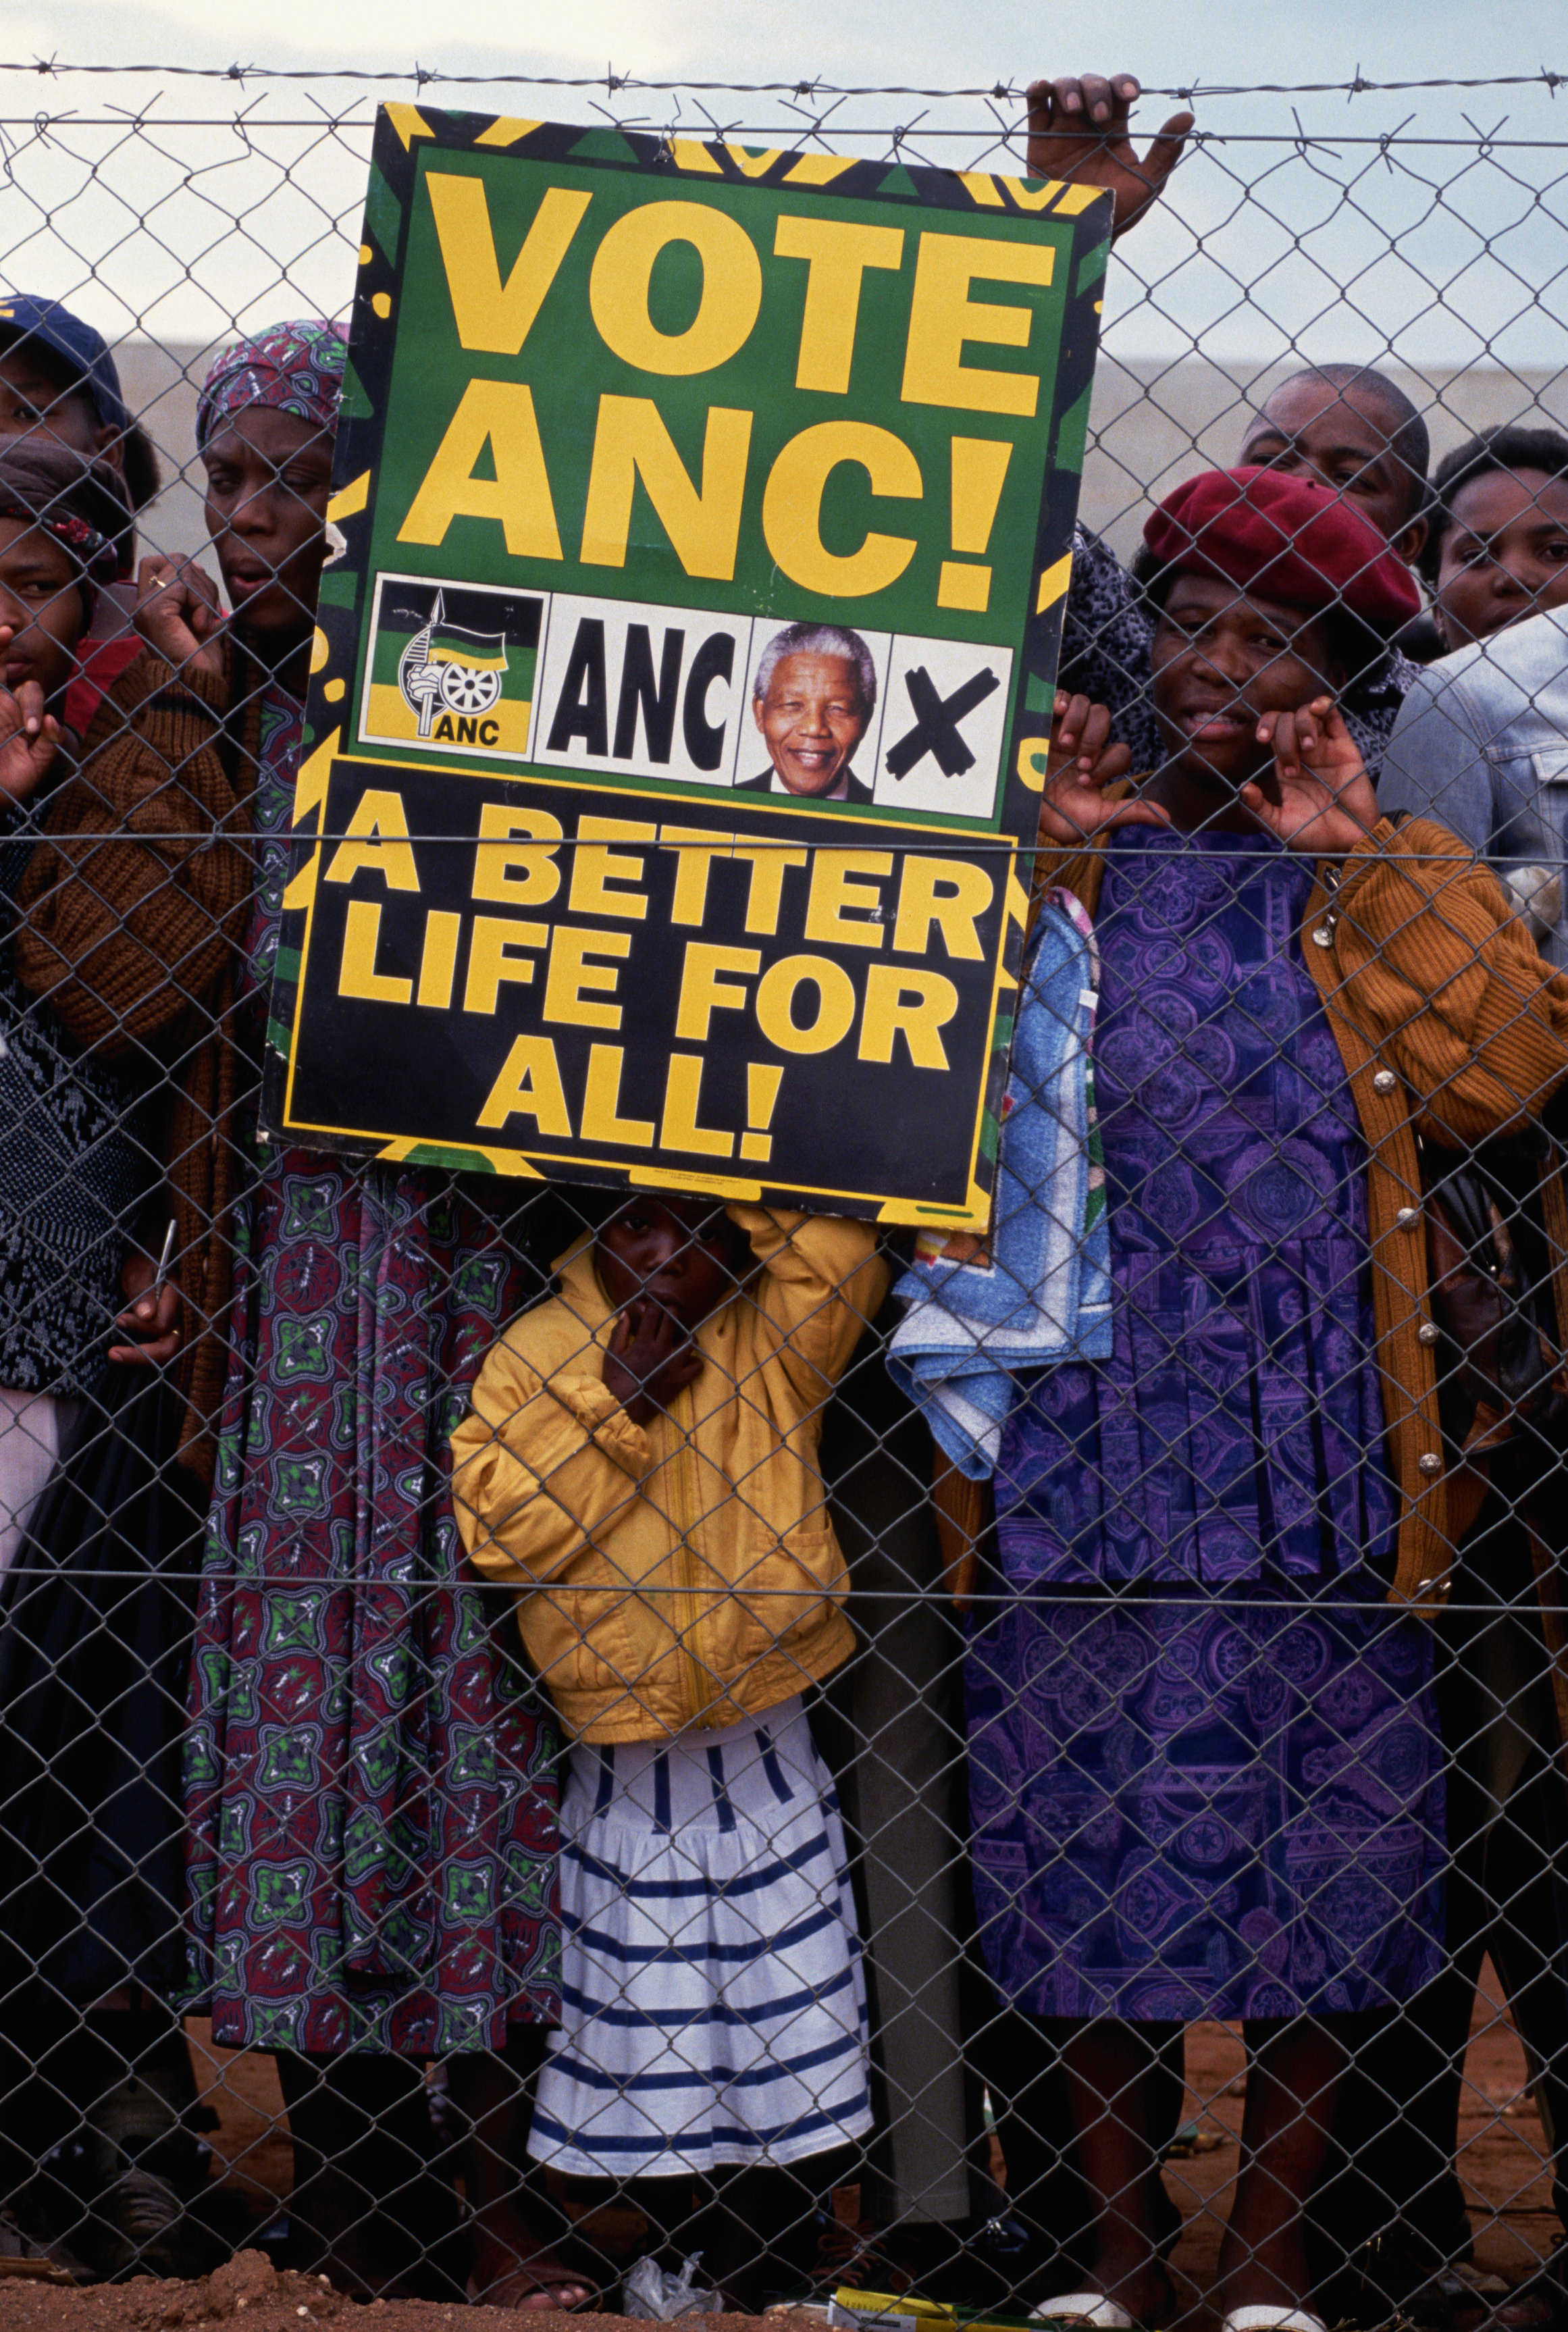 Supporters of Nelson Mandela and the African National Congress gather at a campaign rally before South Africas first democratic election. (Photo by Peter Turnley/Corbis/VCG via Getty Images). 1994